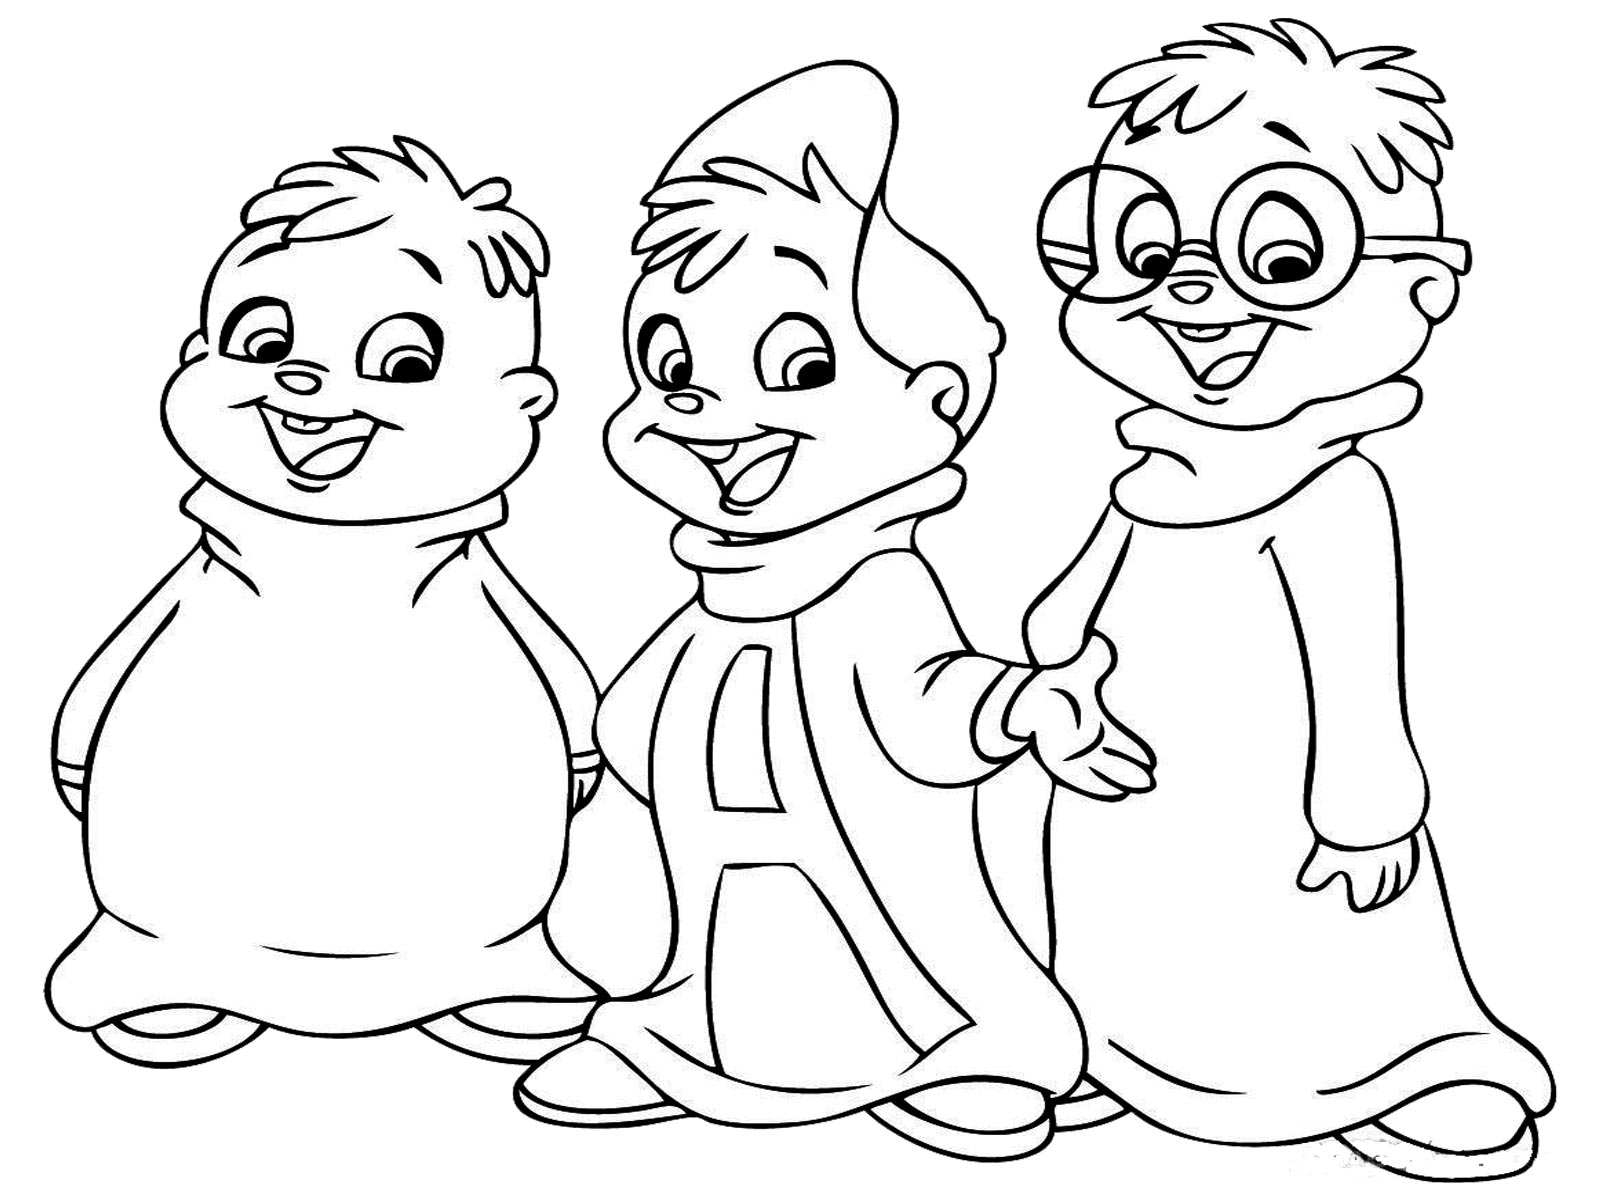 Coloring Pages For Kids   Koloringpages